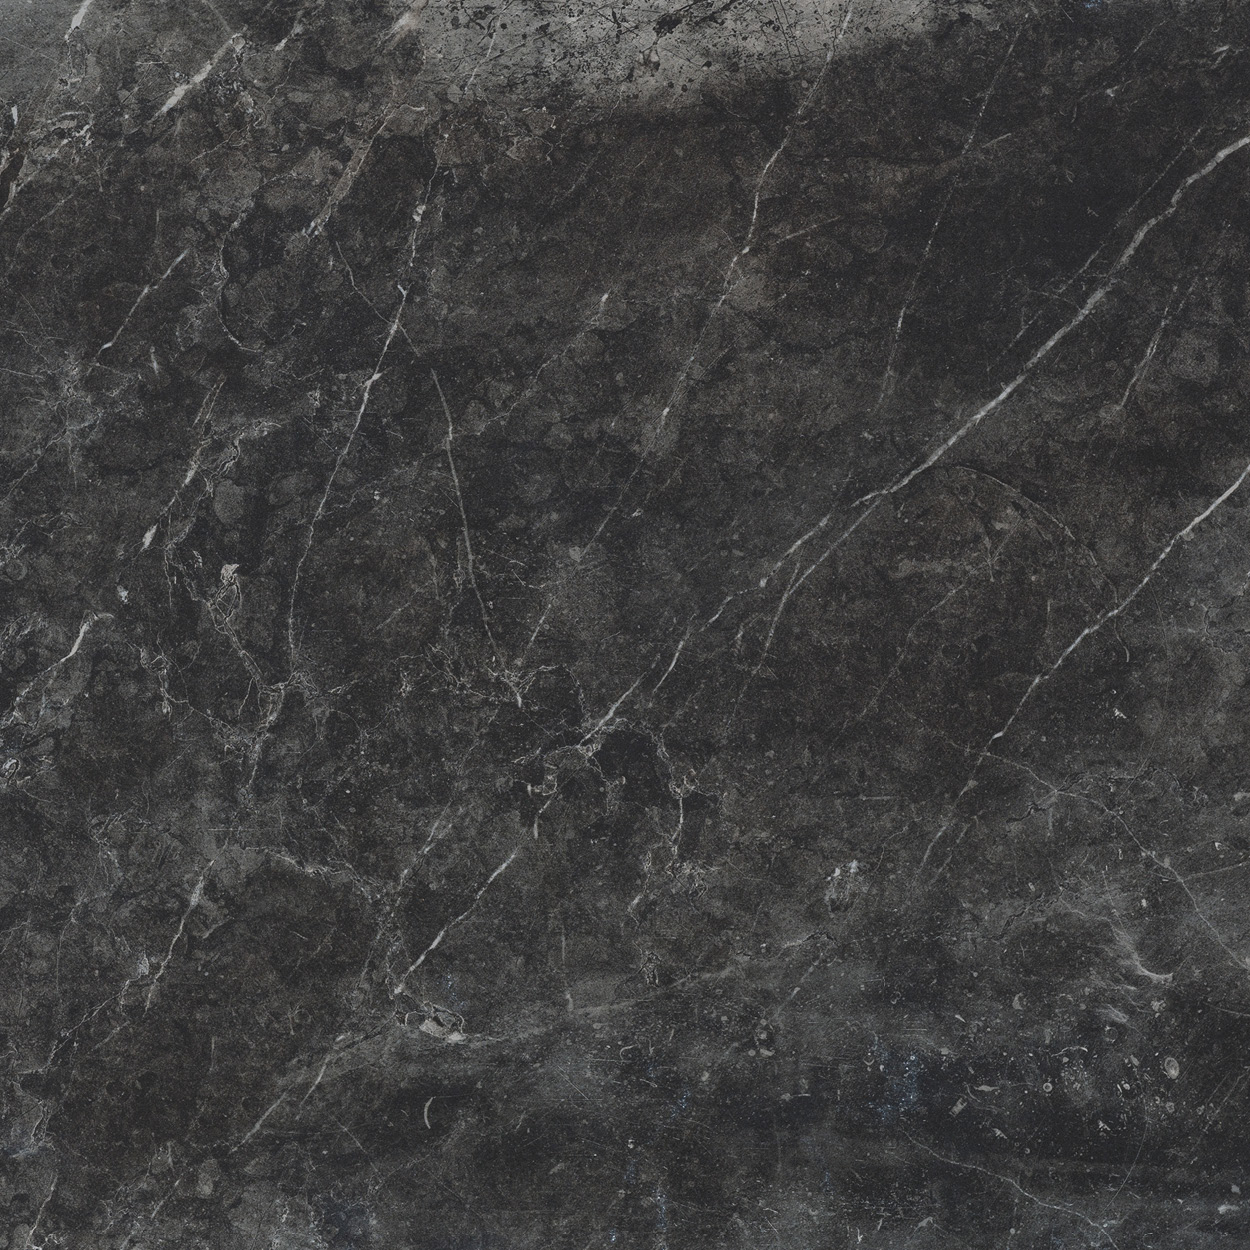 24 x 24 Evo Stone Graphite Honed finished Rectified Porcelain Tile (SPECIAL ORDER ONLY)